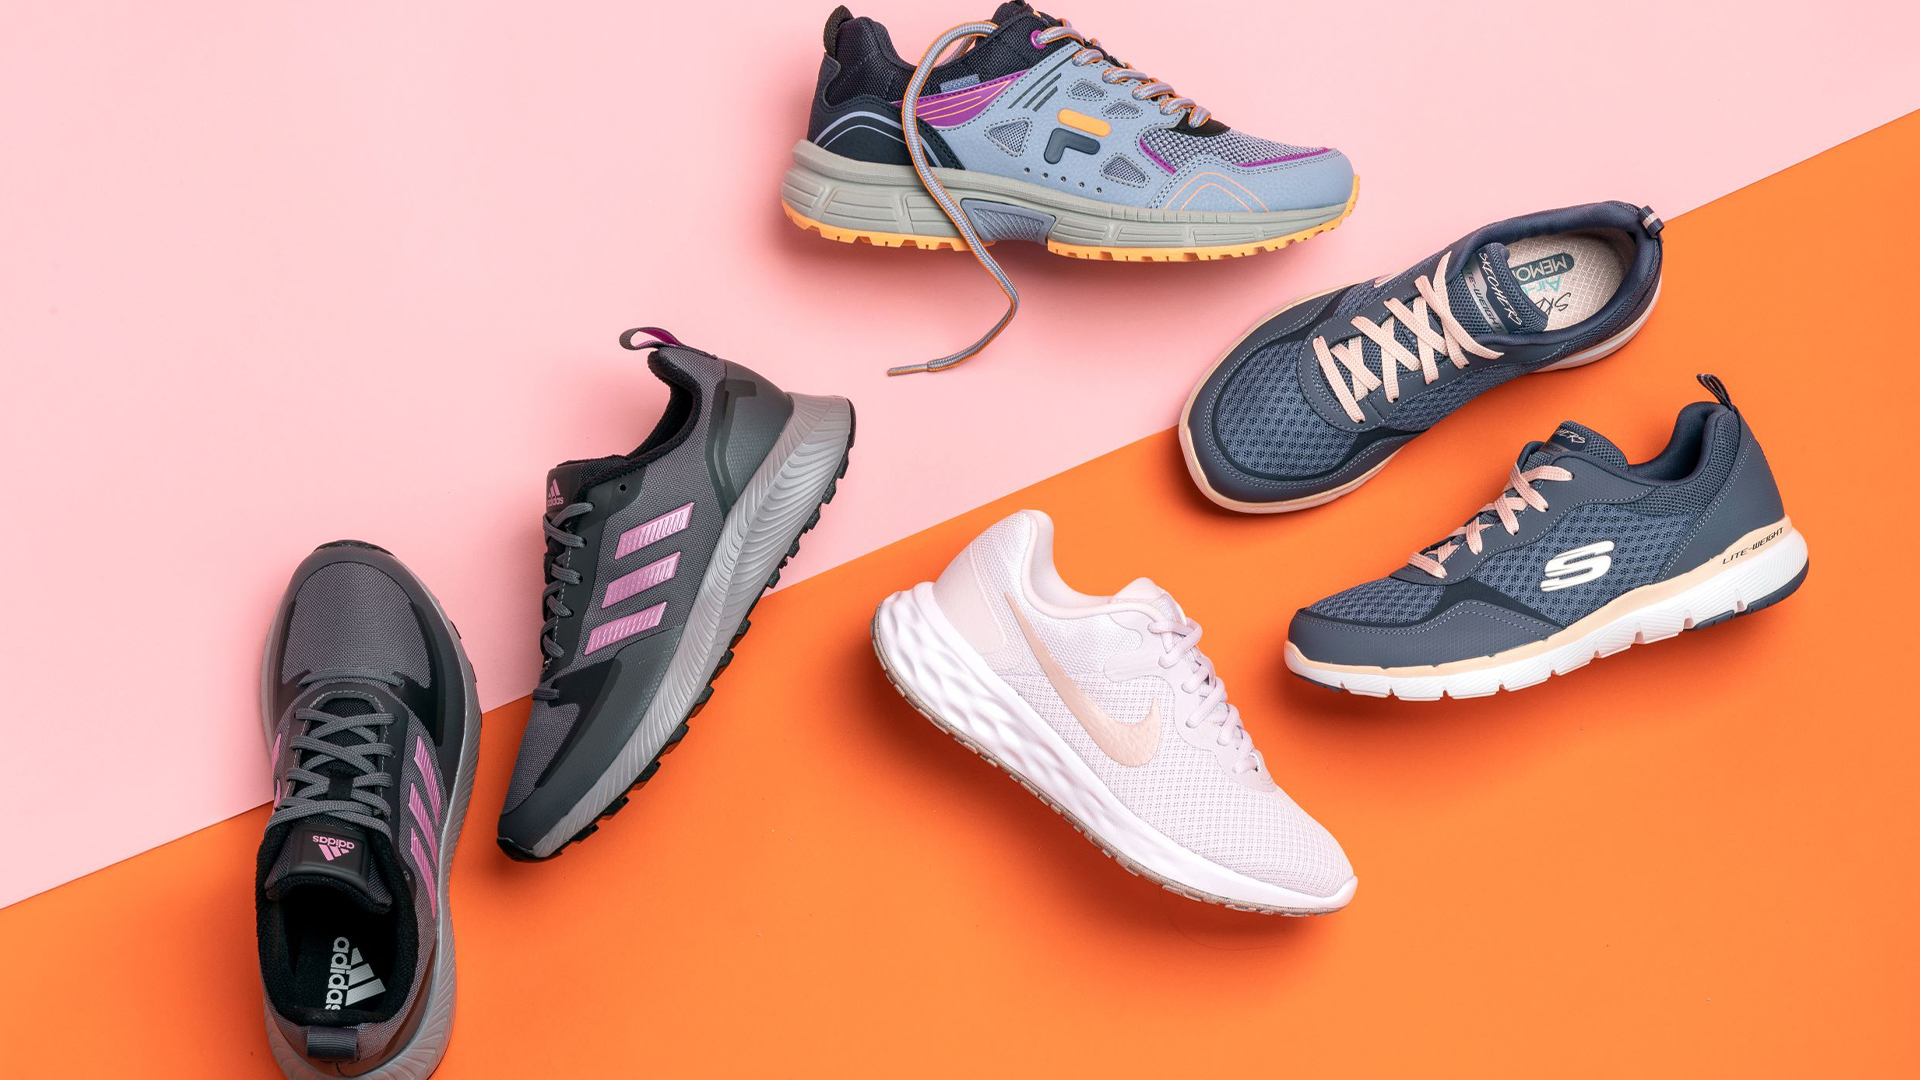 Grind Stumble island Deichmann launches "Branded Price Promise" including Nike and Adidas -  TheIndustry.fashion